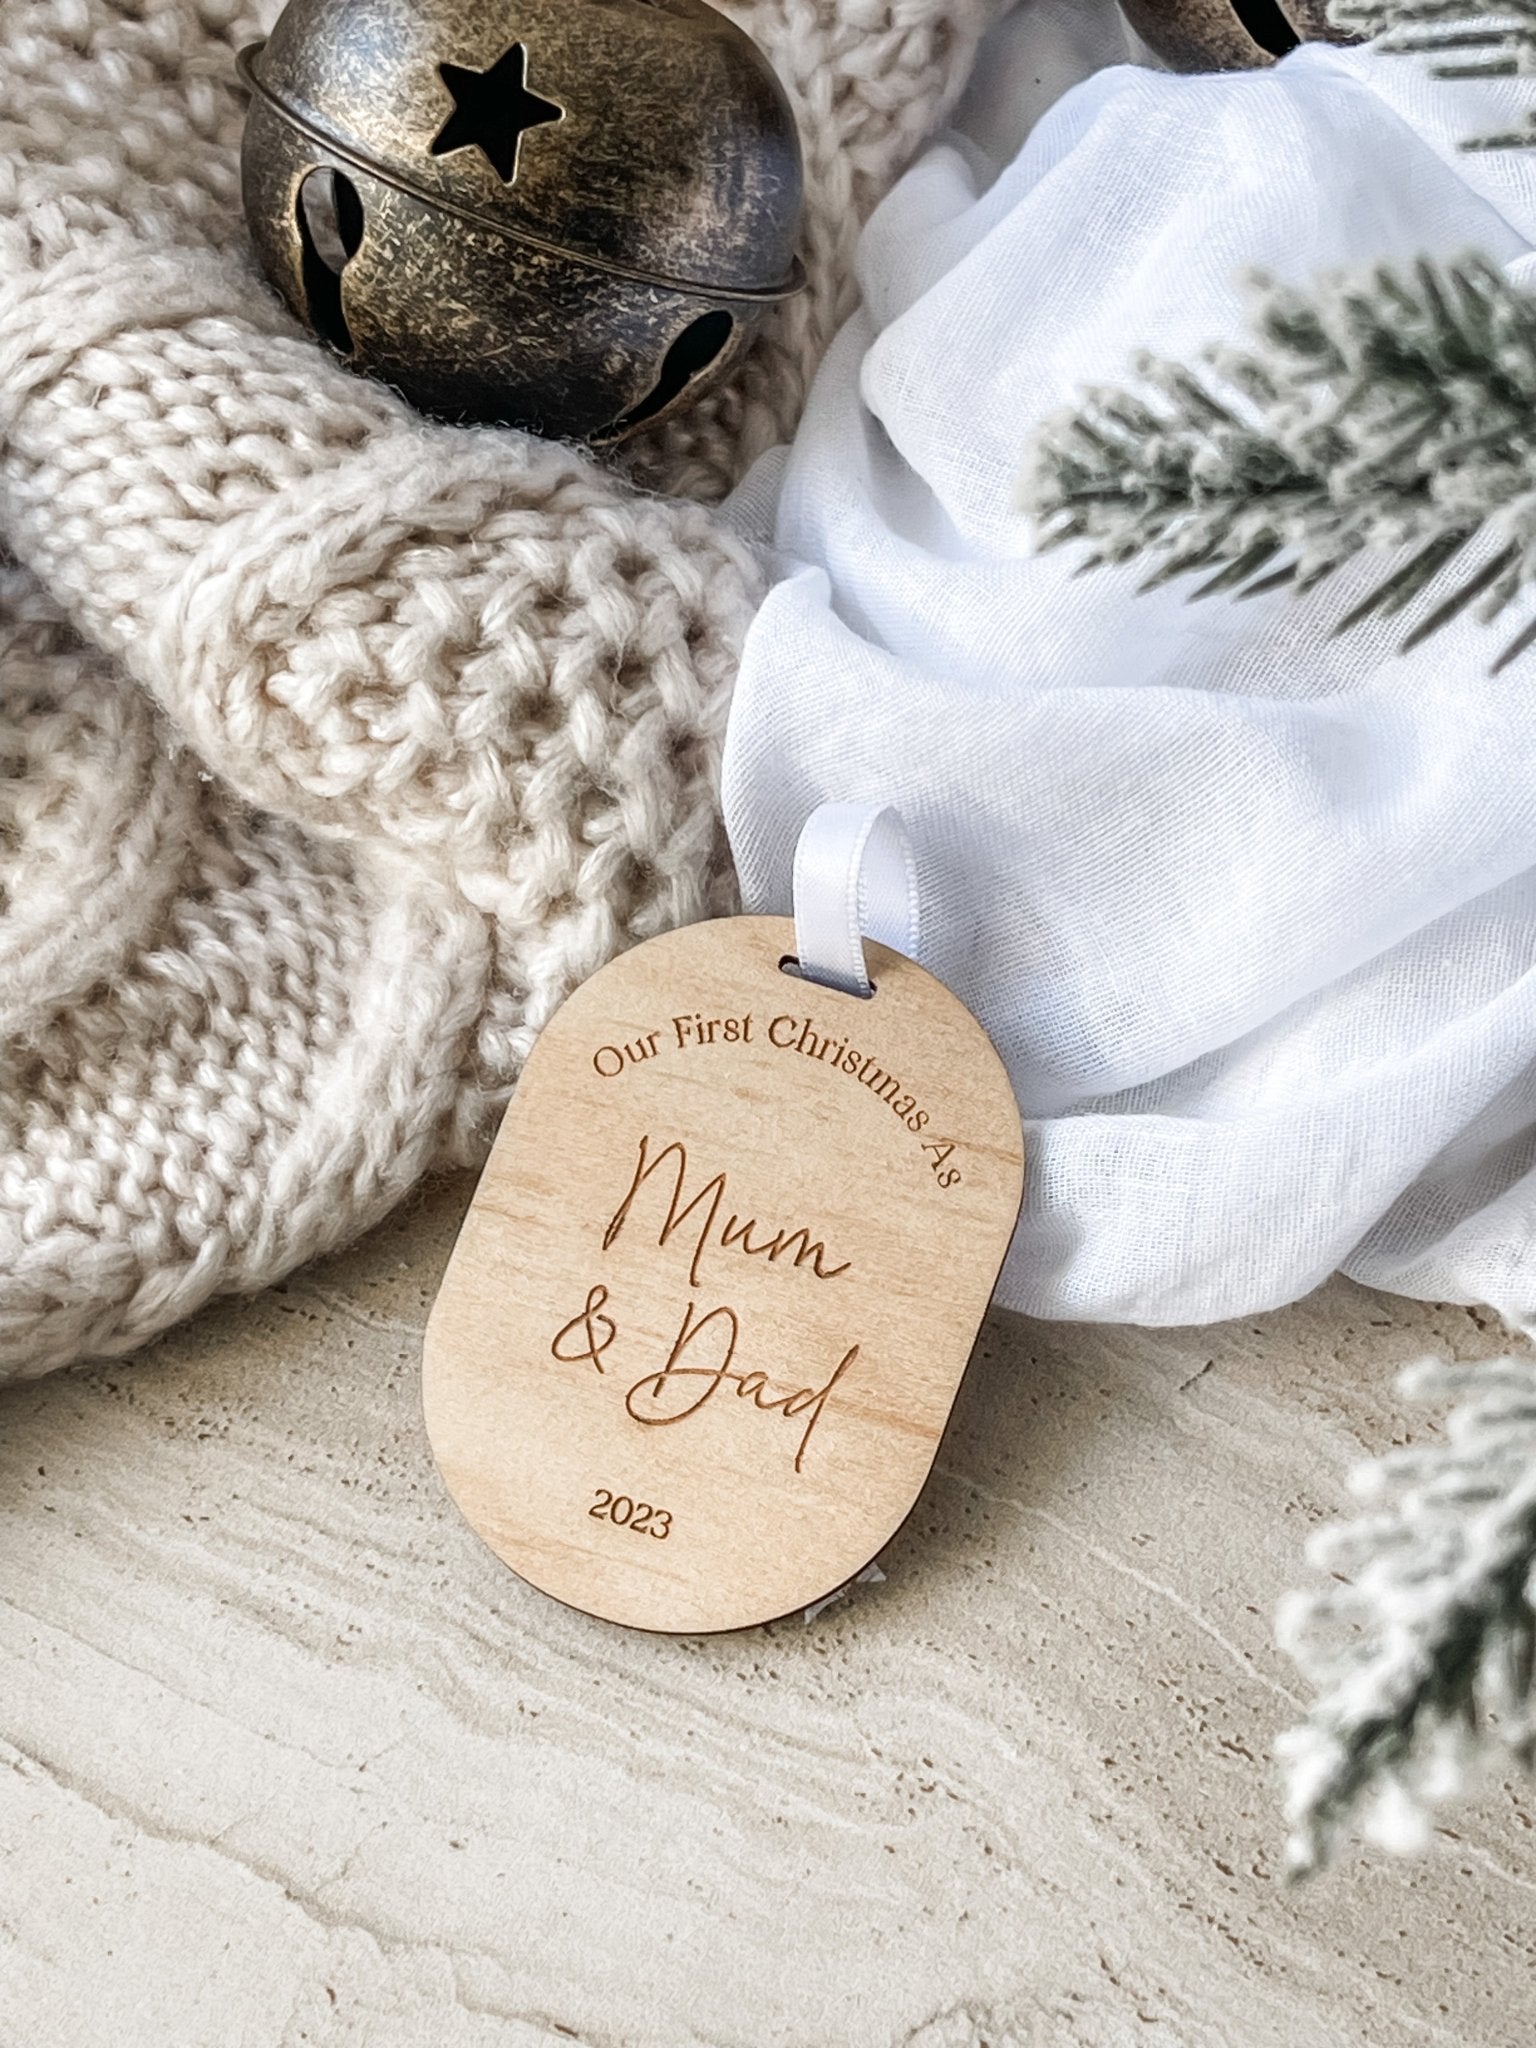 First Christmas as Mum and Dad Wooden Ornament - The Humble Gift Co.